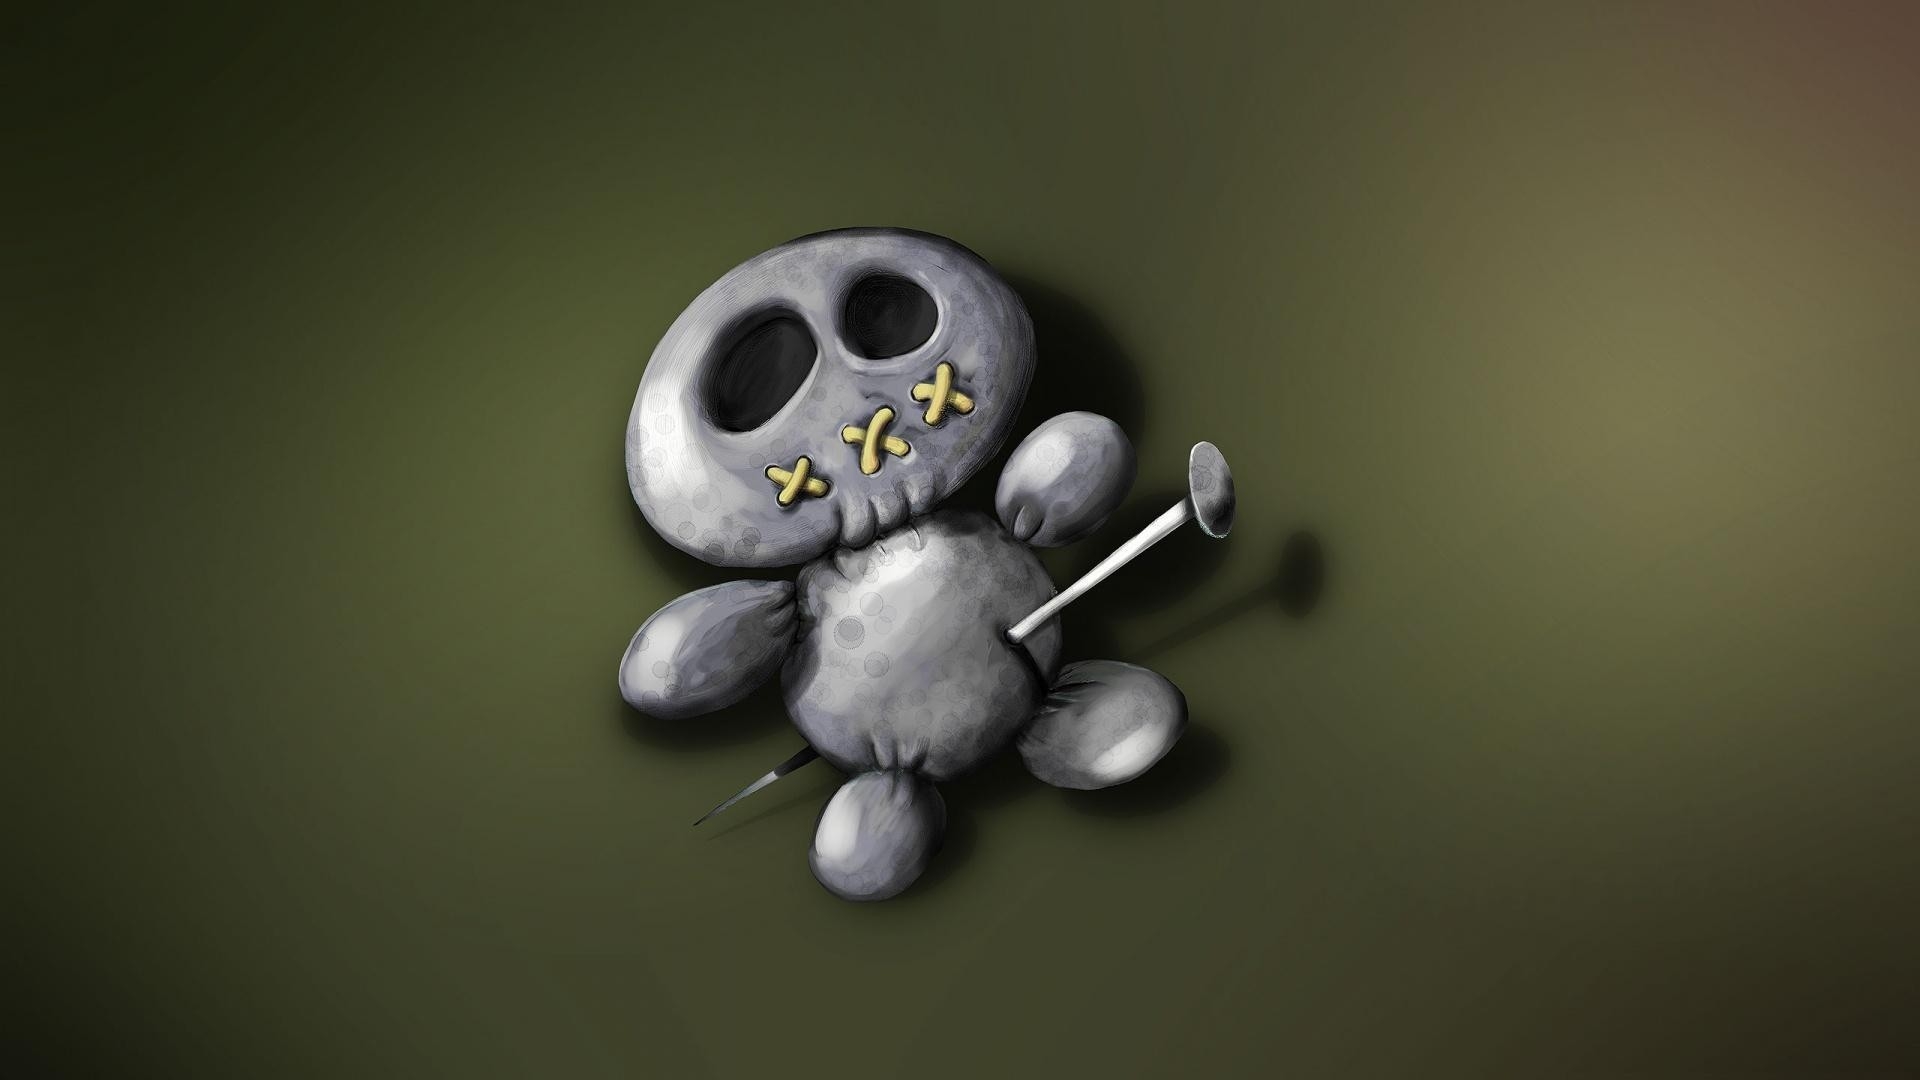 Wallpaper Voodoo Doll Toy Scary Full HD 1080p